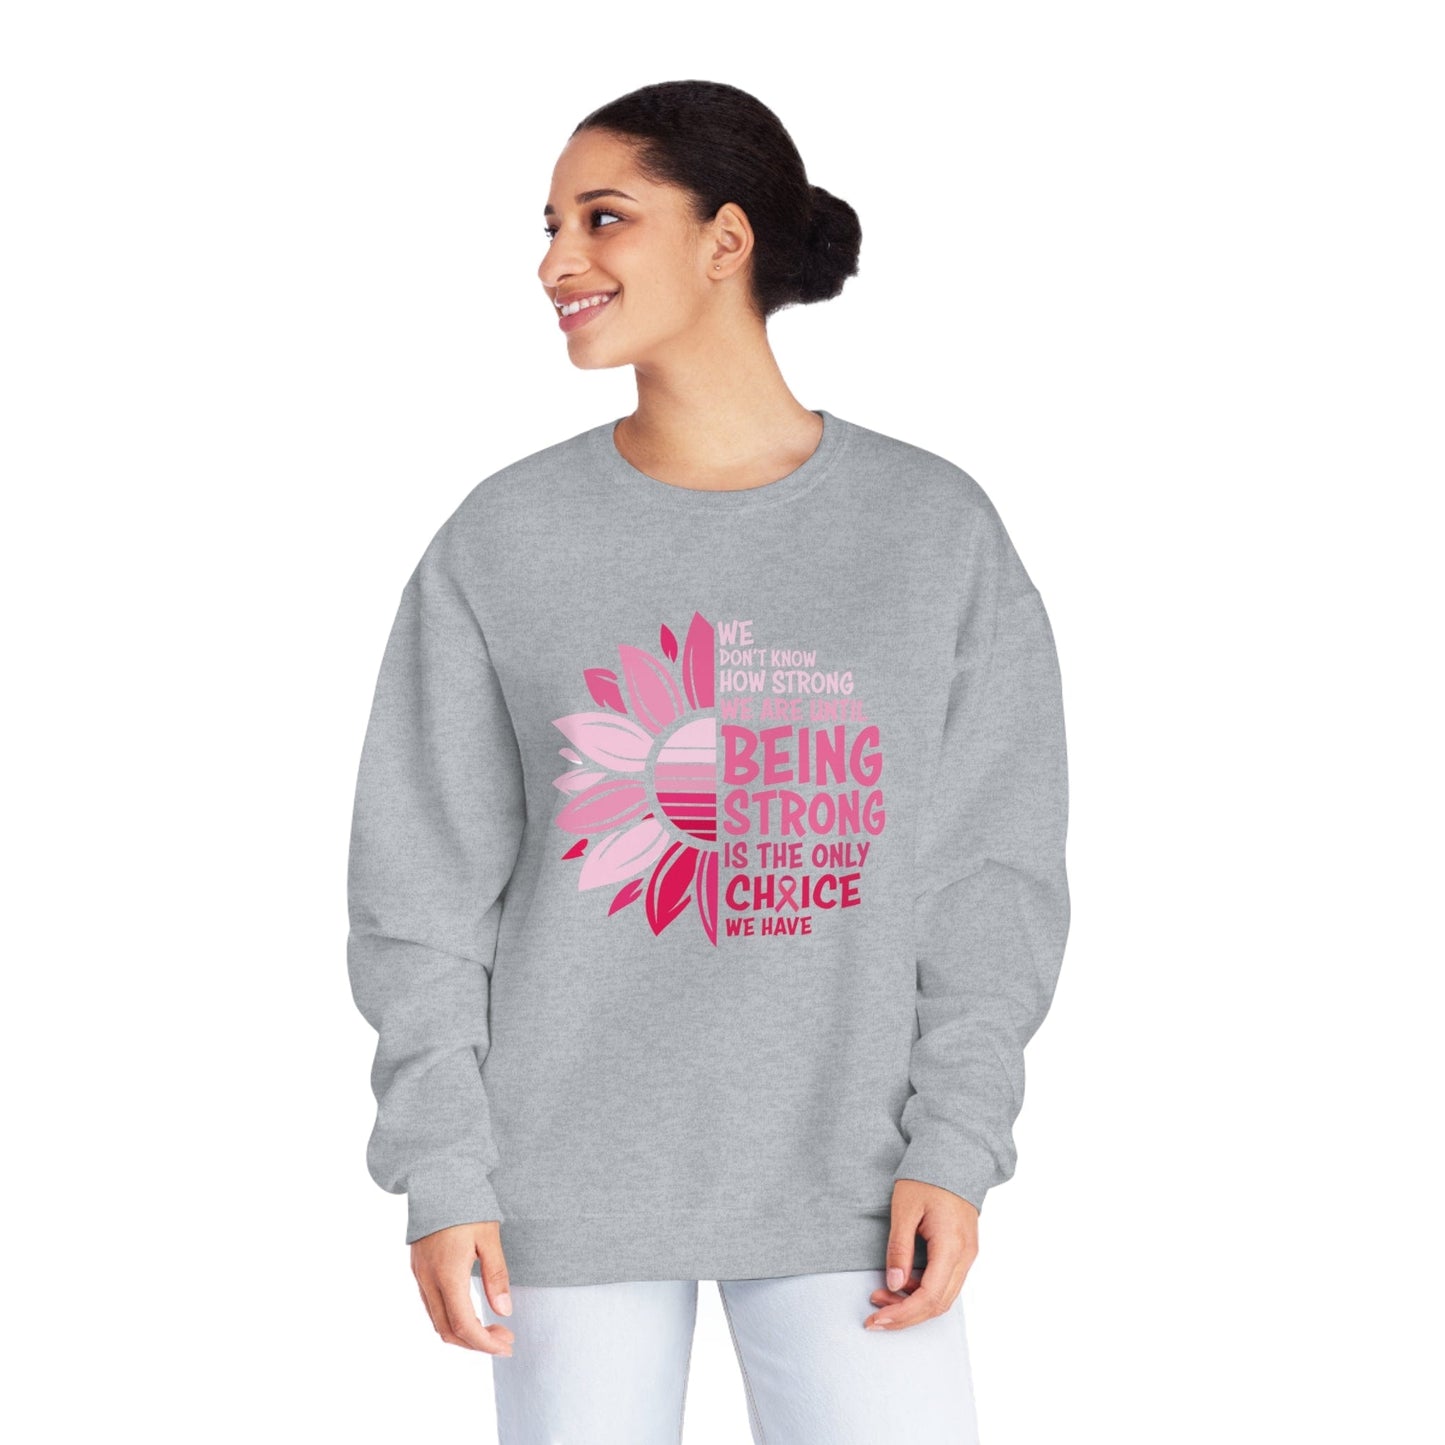 We Don't Know How Strong We Are Unisex NuBlend® Crewneck Sweatshirt